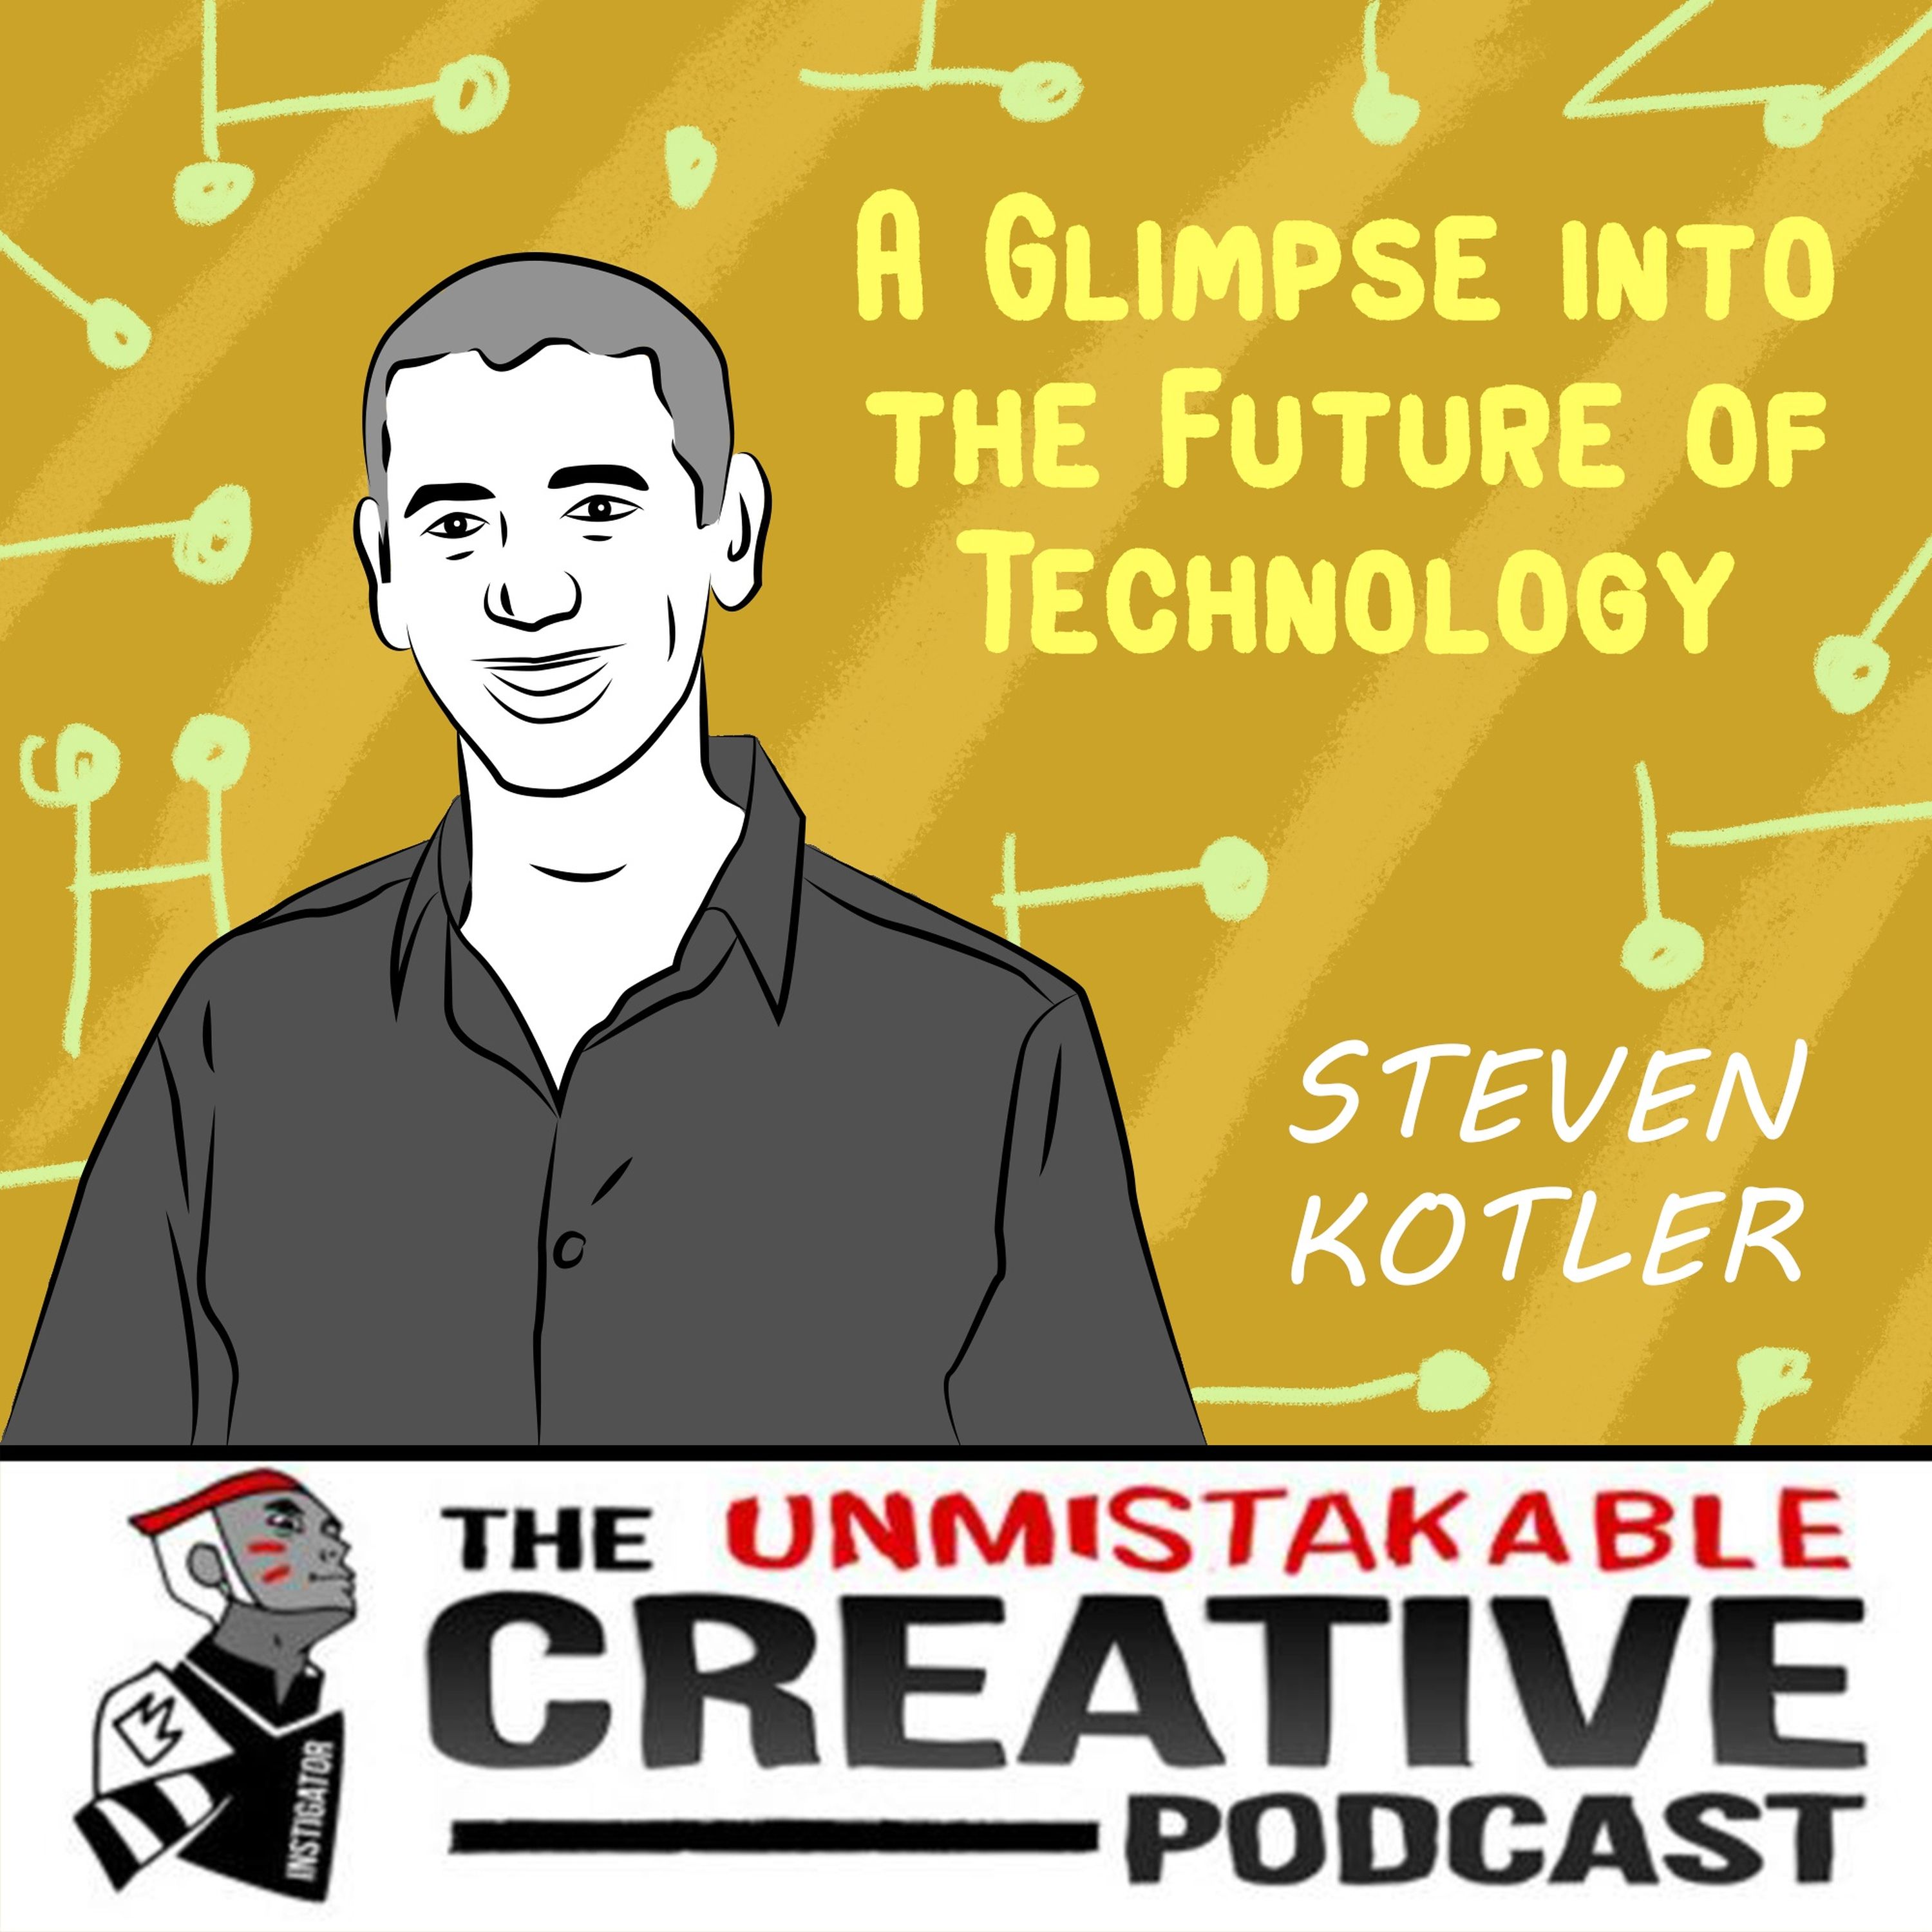 A Glimpse into the Future of Technology with Steven Kotler Image